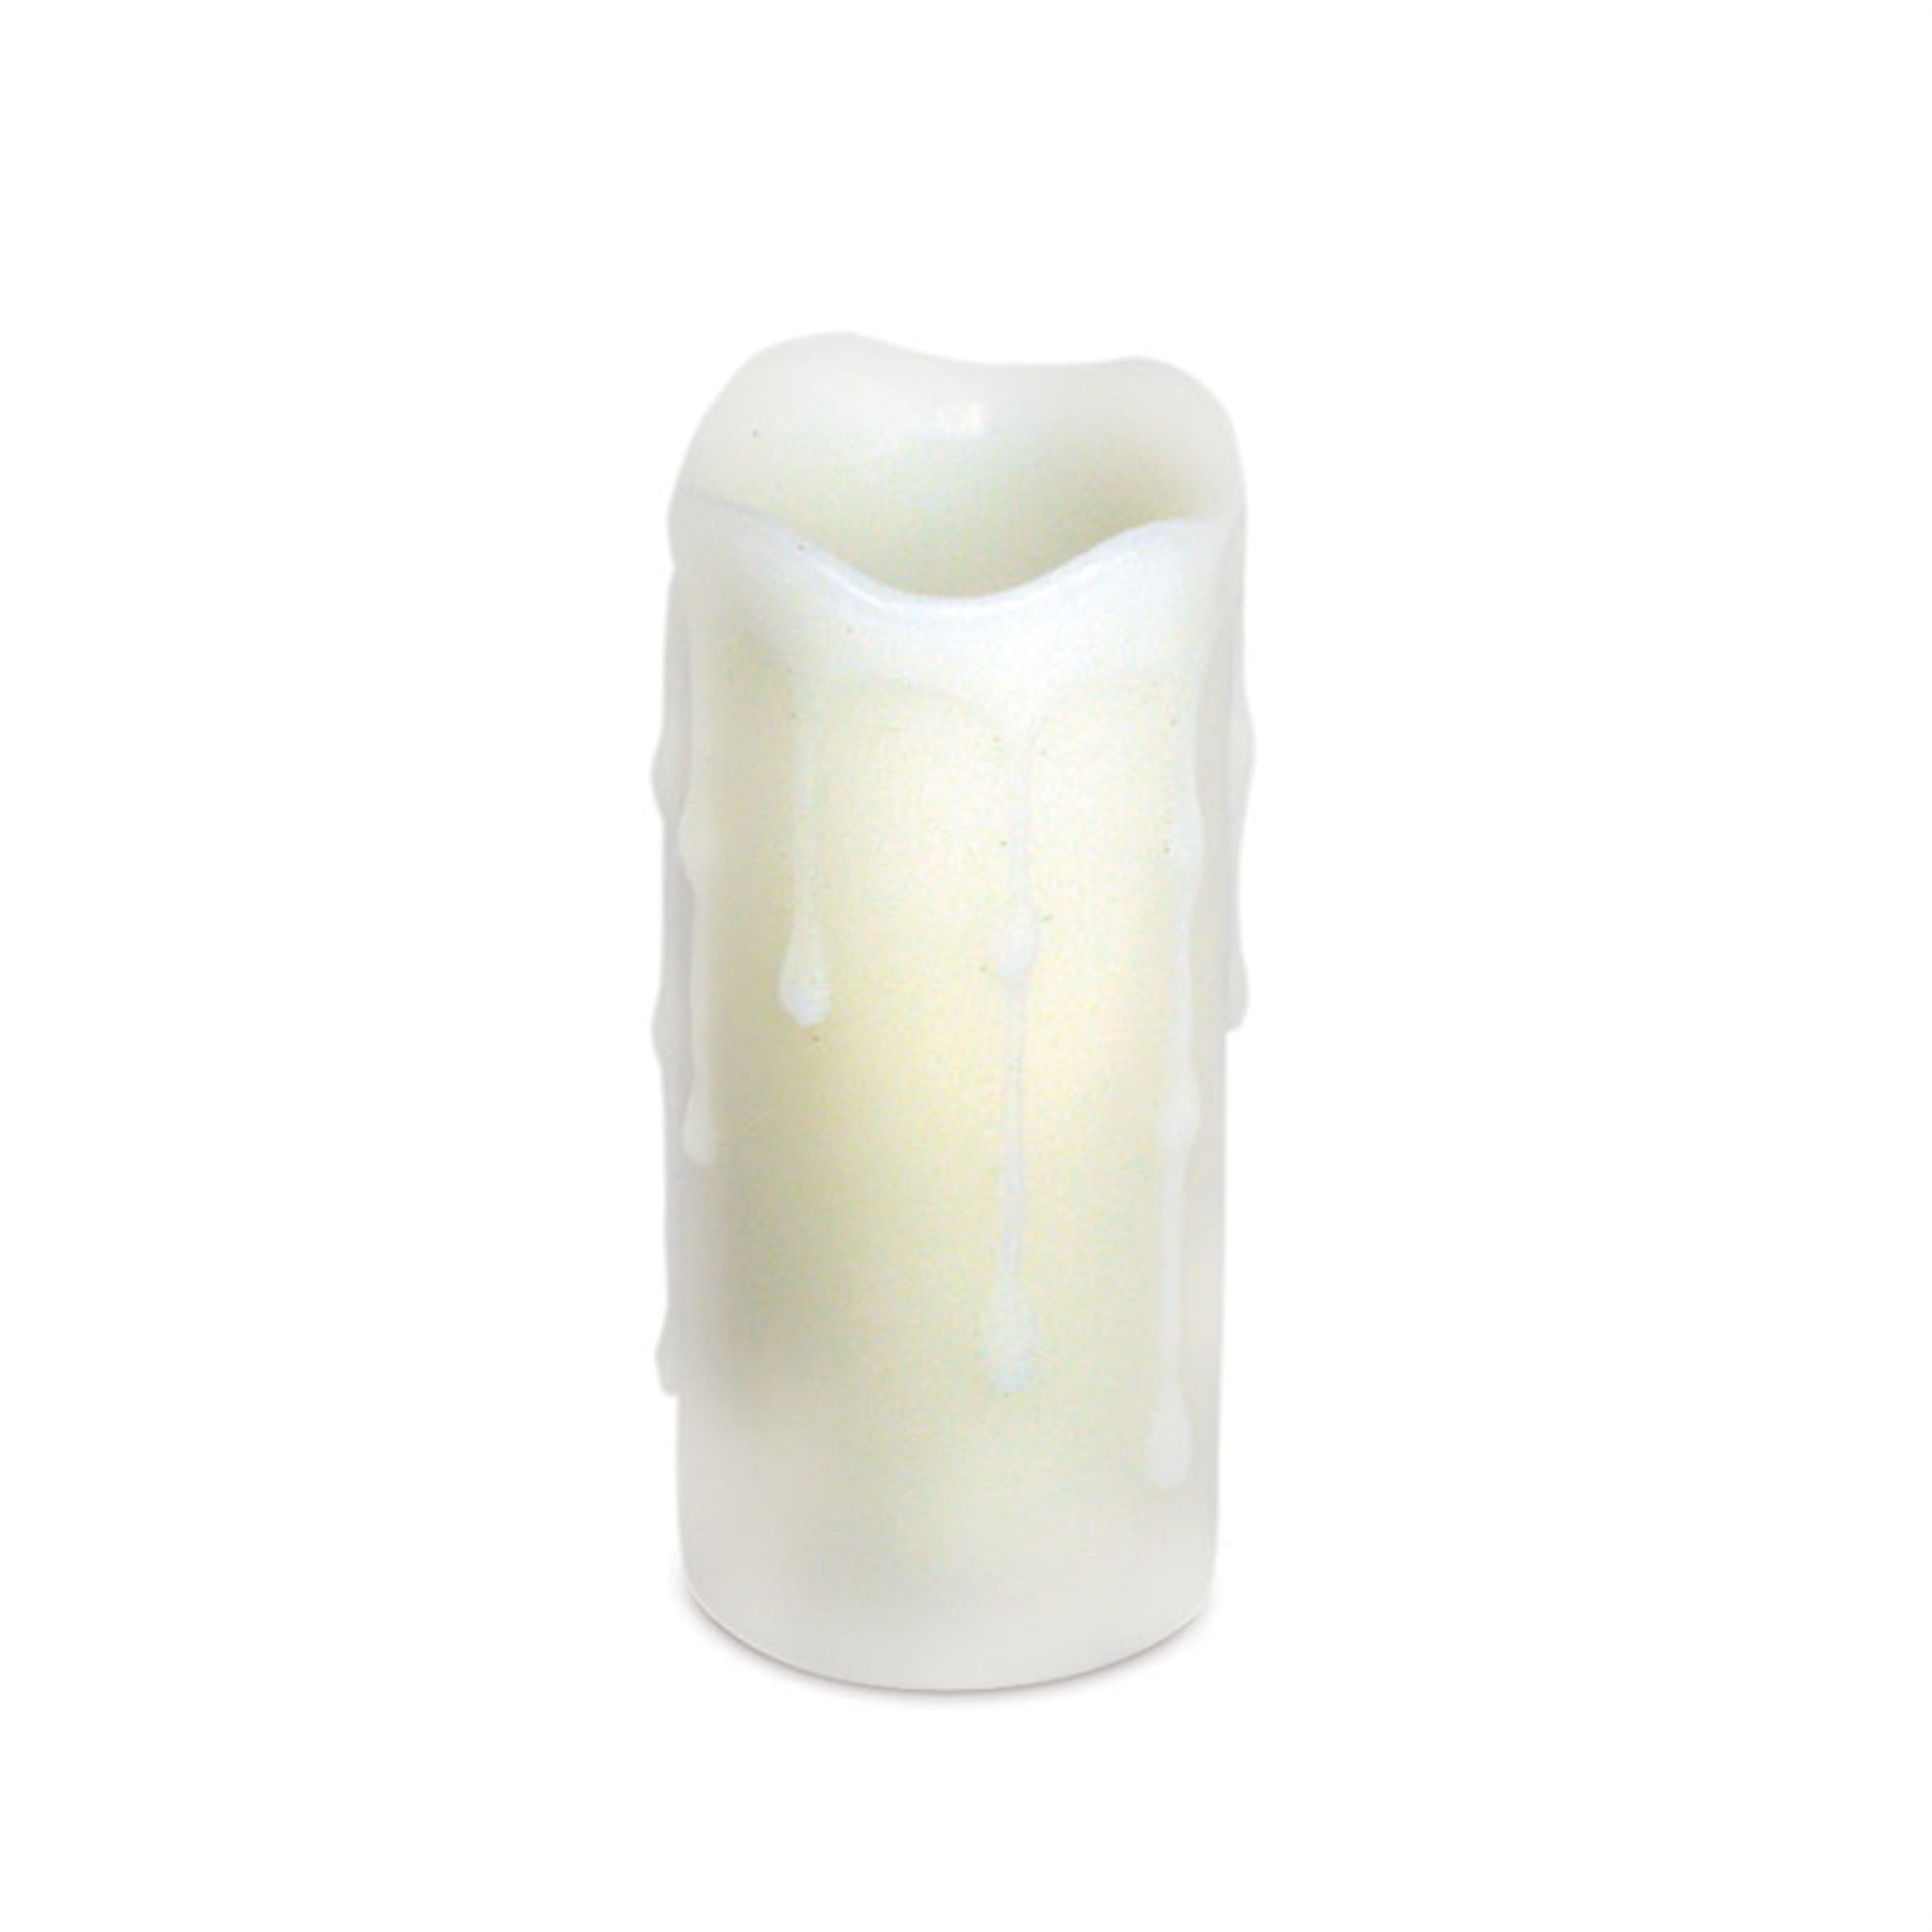 LED Wax Dripping Pillar Candle (Set of 6) 1.75"Dx4"H Wax/Plastic - 2 AA Batteries Not Incld